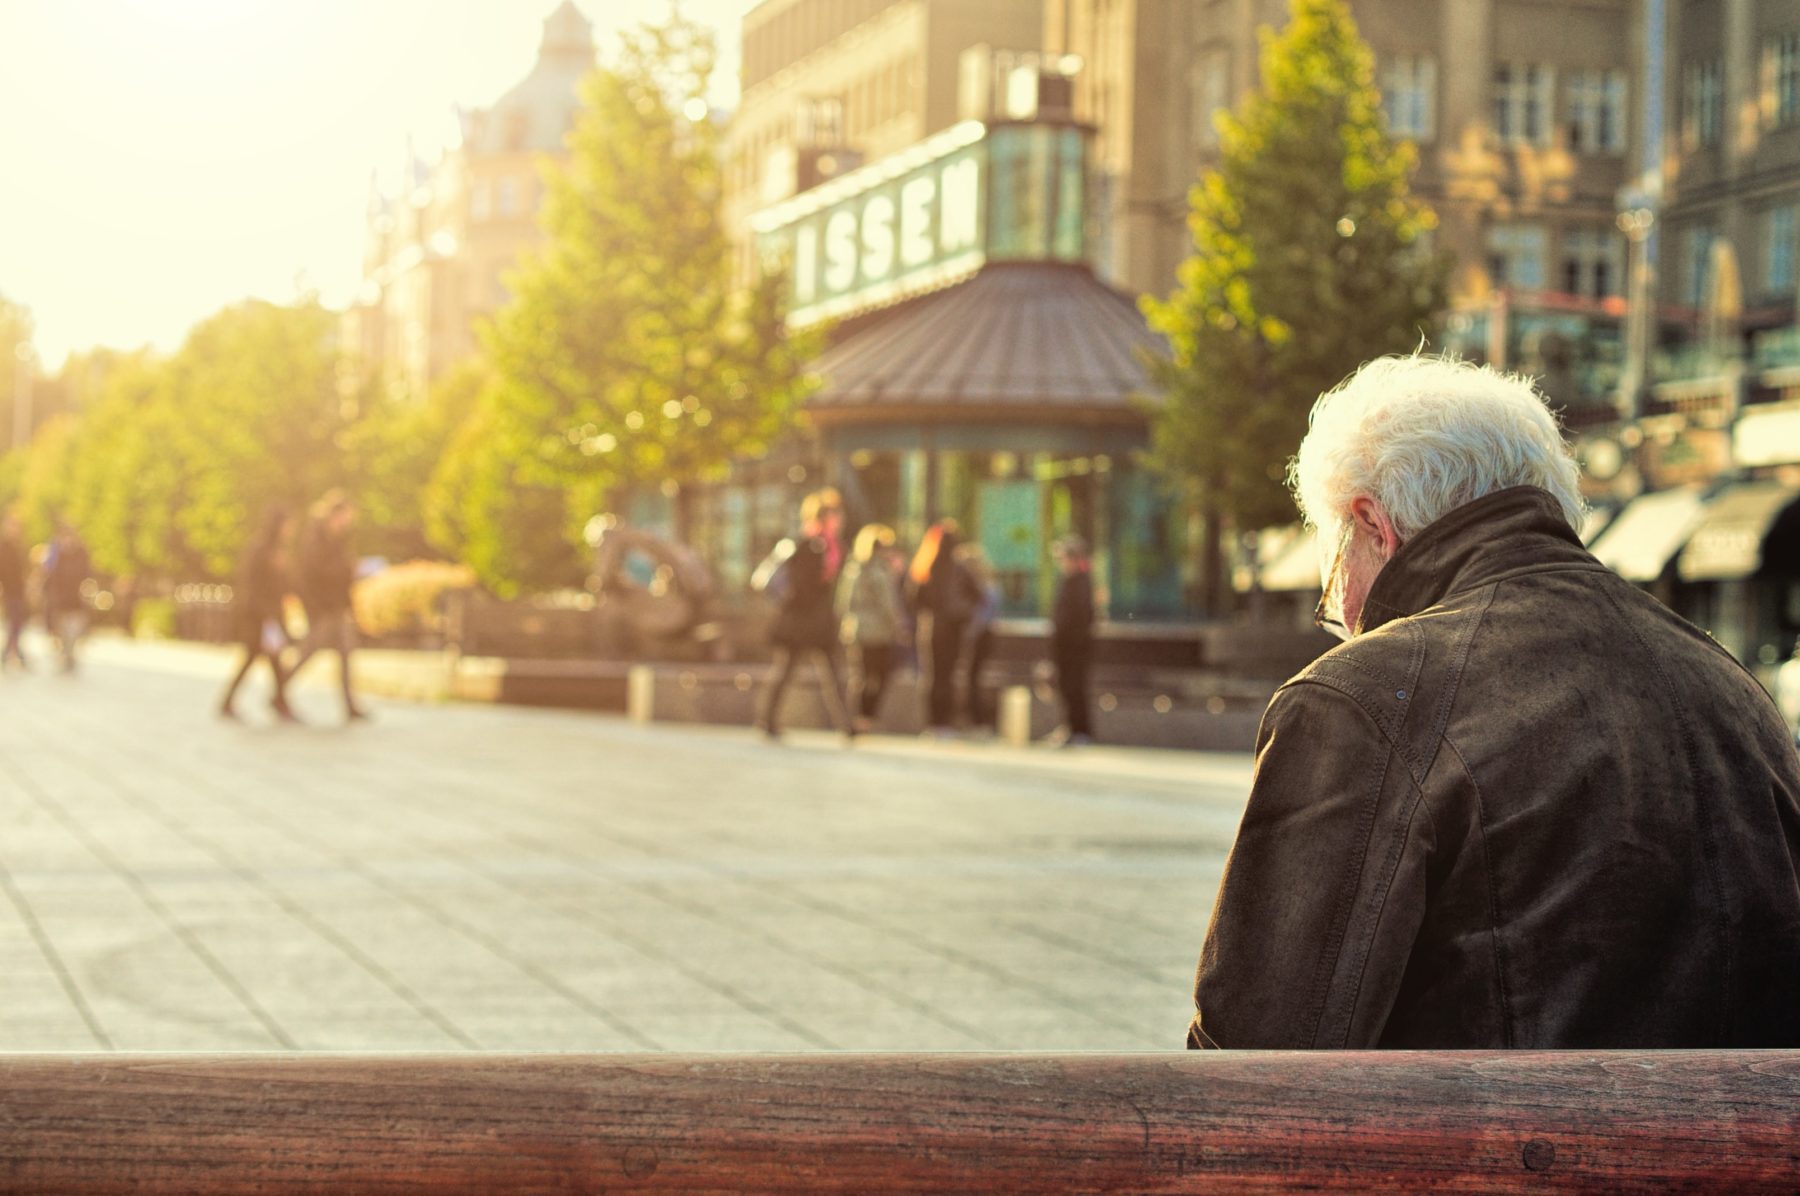 An elderly person sitting on a bench in the town centre.